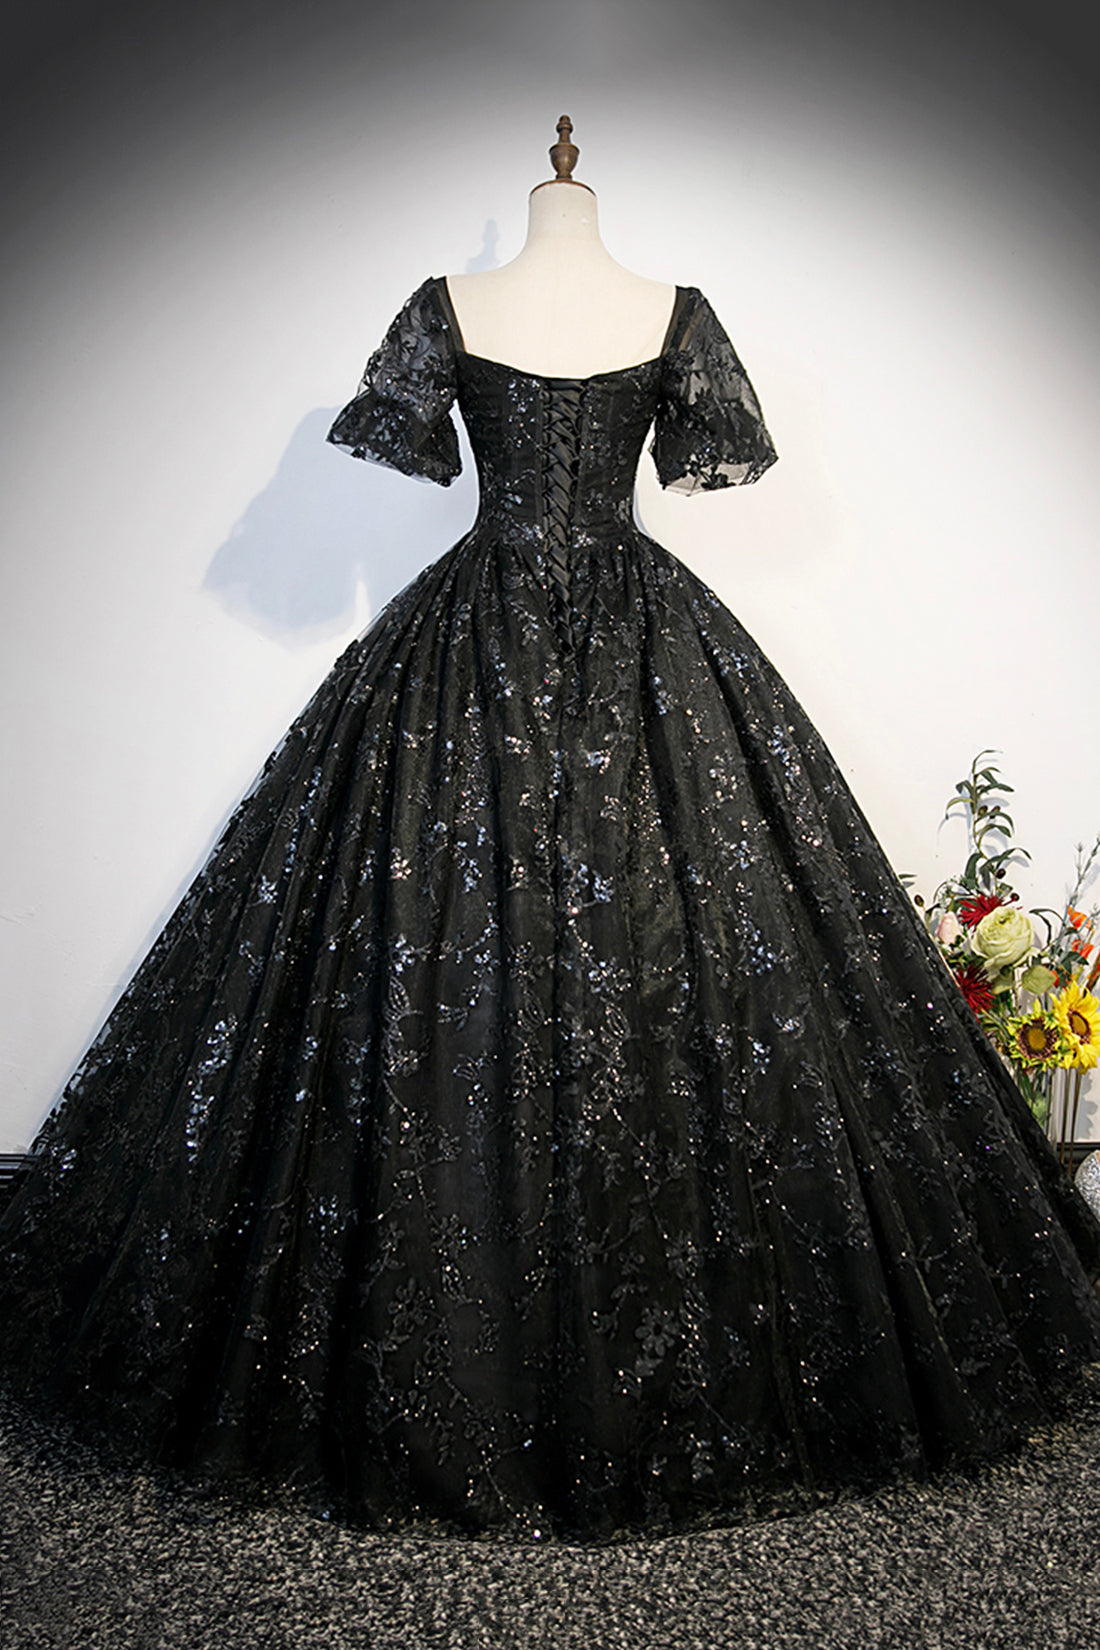 Dress Ideas, Black Tulle Sequins Long Prom Dress, A-Line Short Sleeve Formal Evening Gown